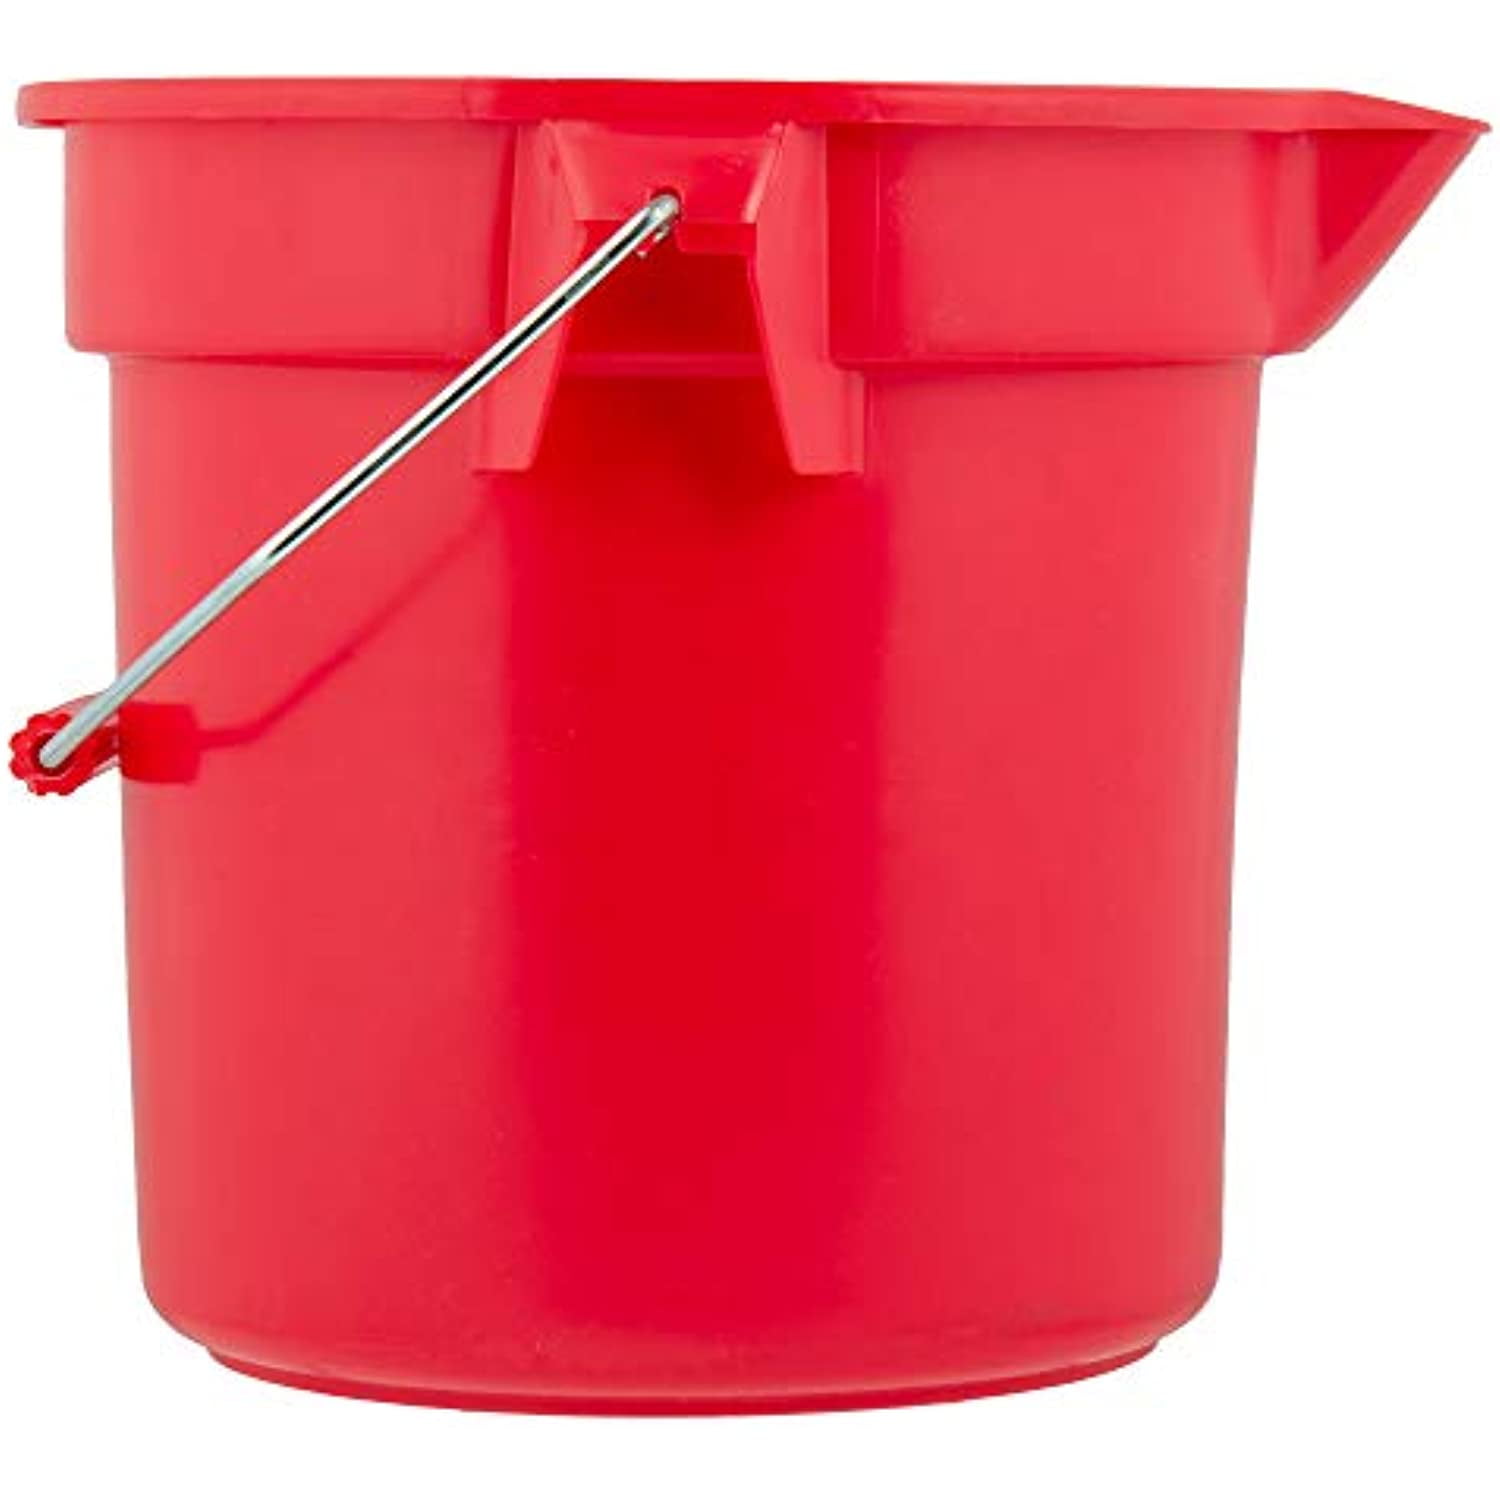 RW Clean 3 qt Square Red Plastic Sanitizing Bucket - with Stainless Steel Handle - 7 inch x 6 3/4 inch x 6 inch - 1 Count Box